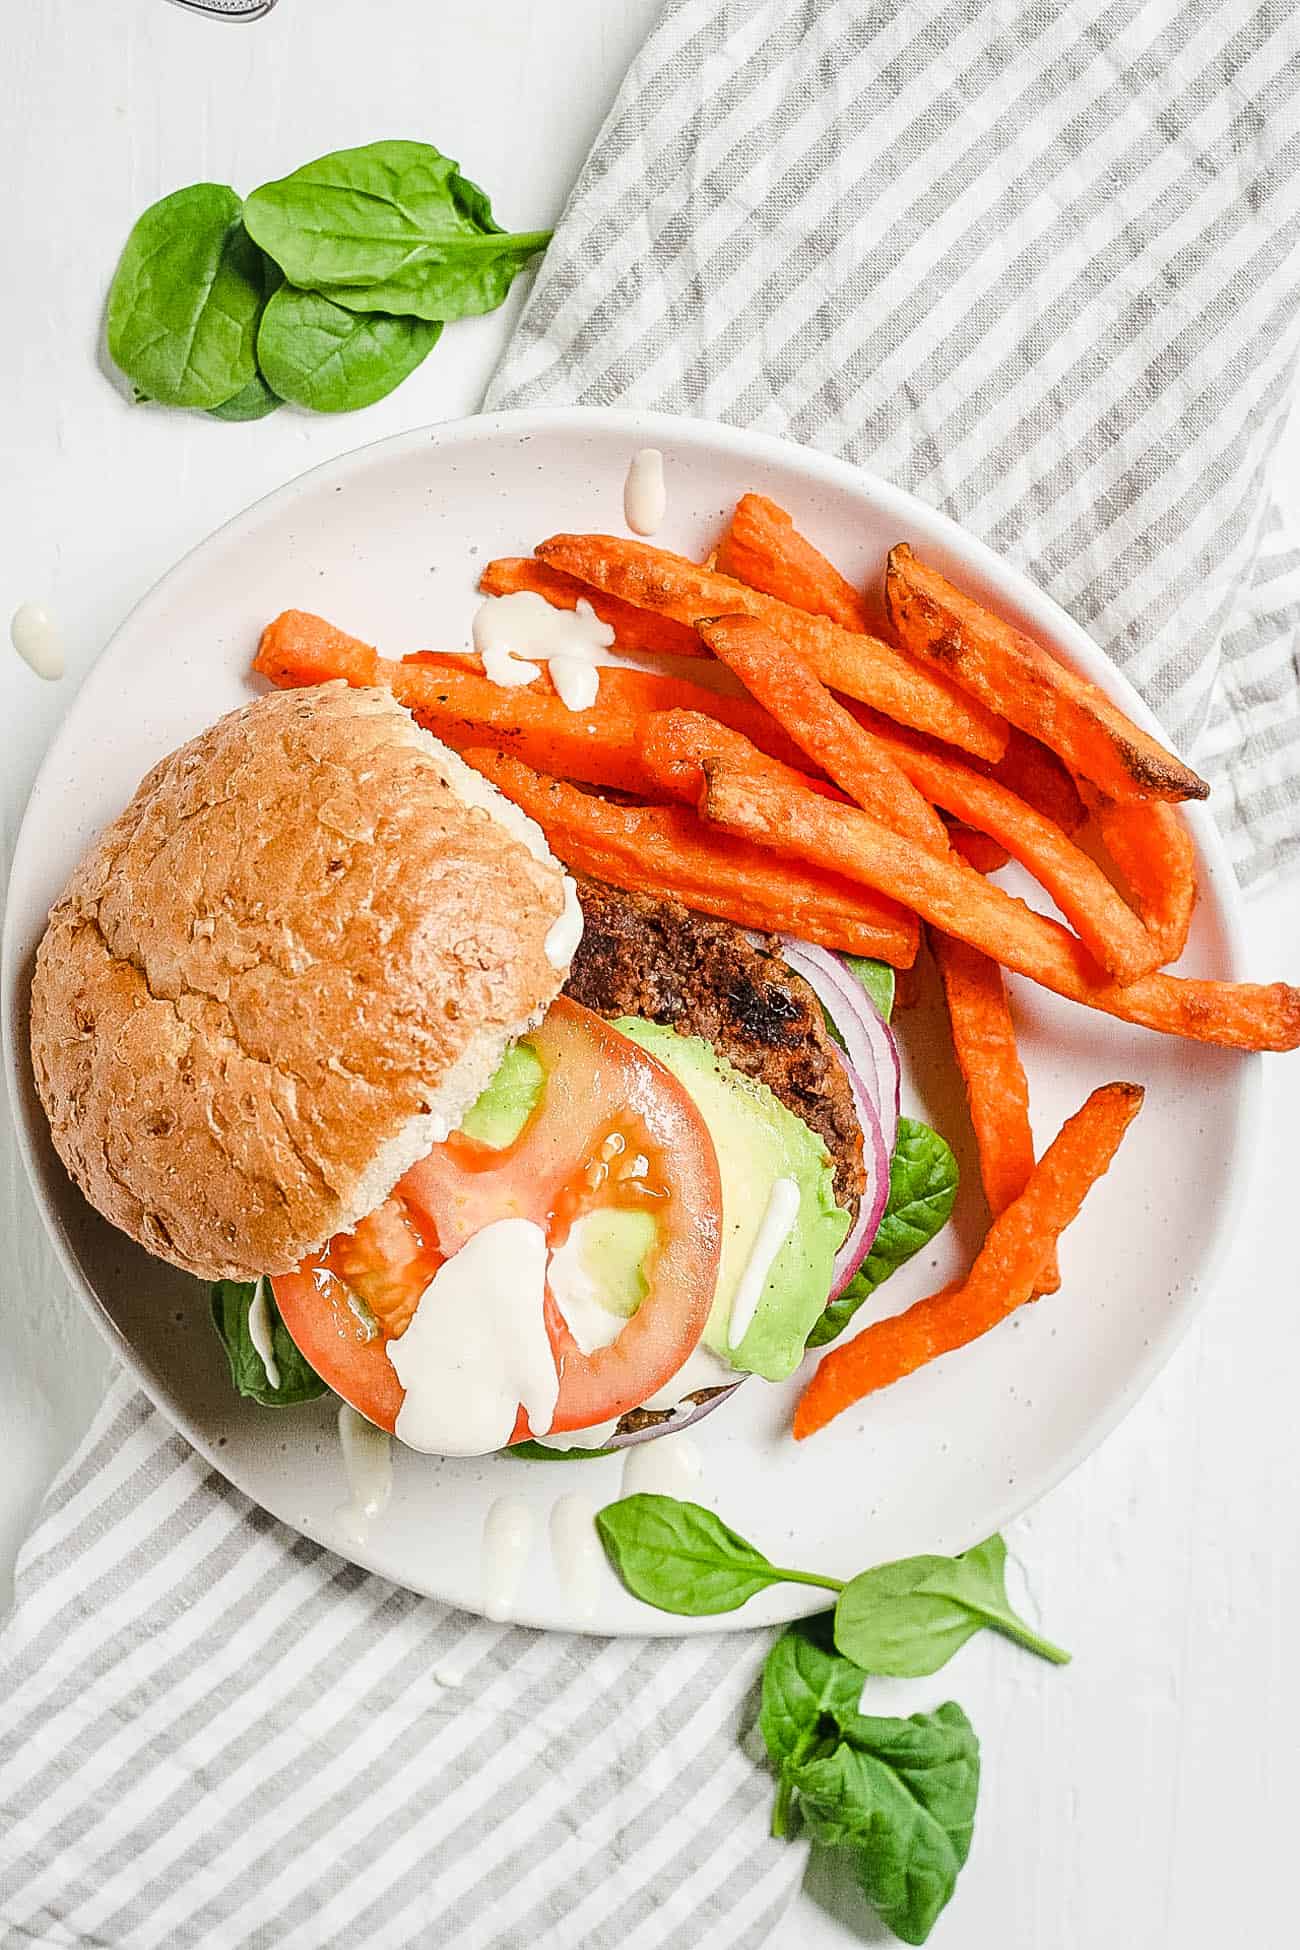 chipotle black bean burgers with tahini sauce and sweet potato fries top view